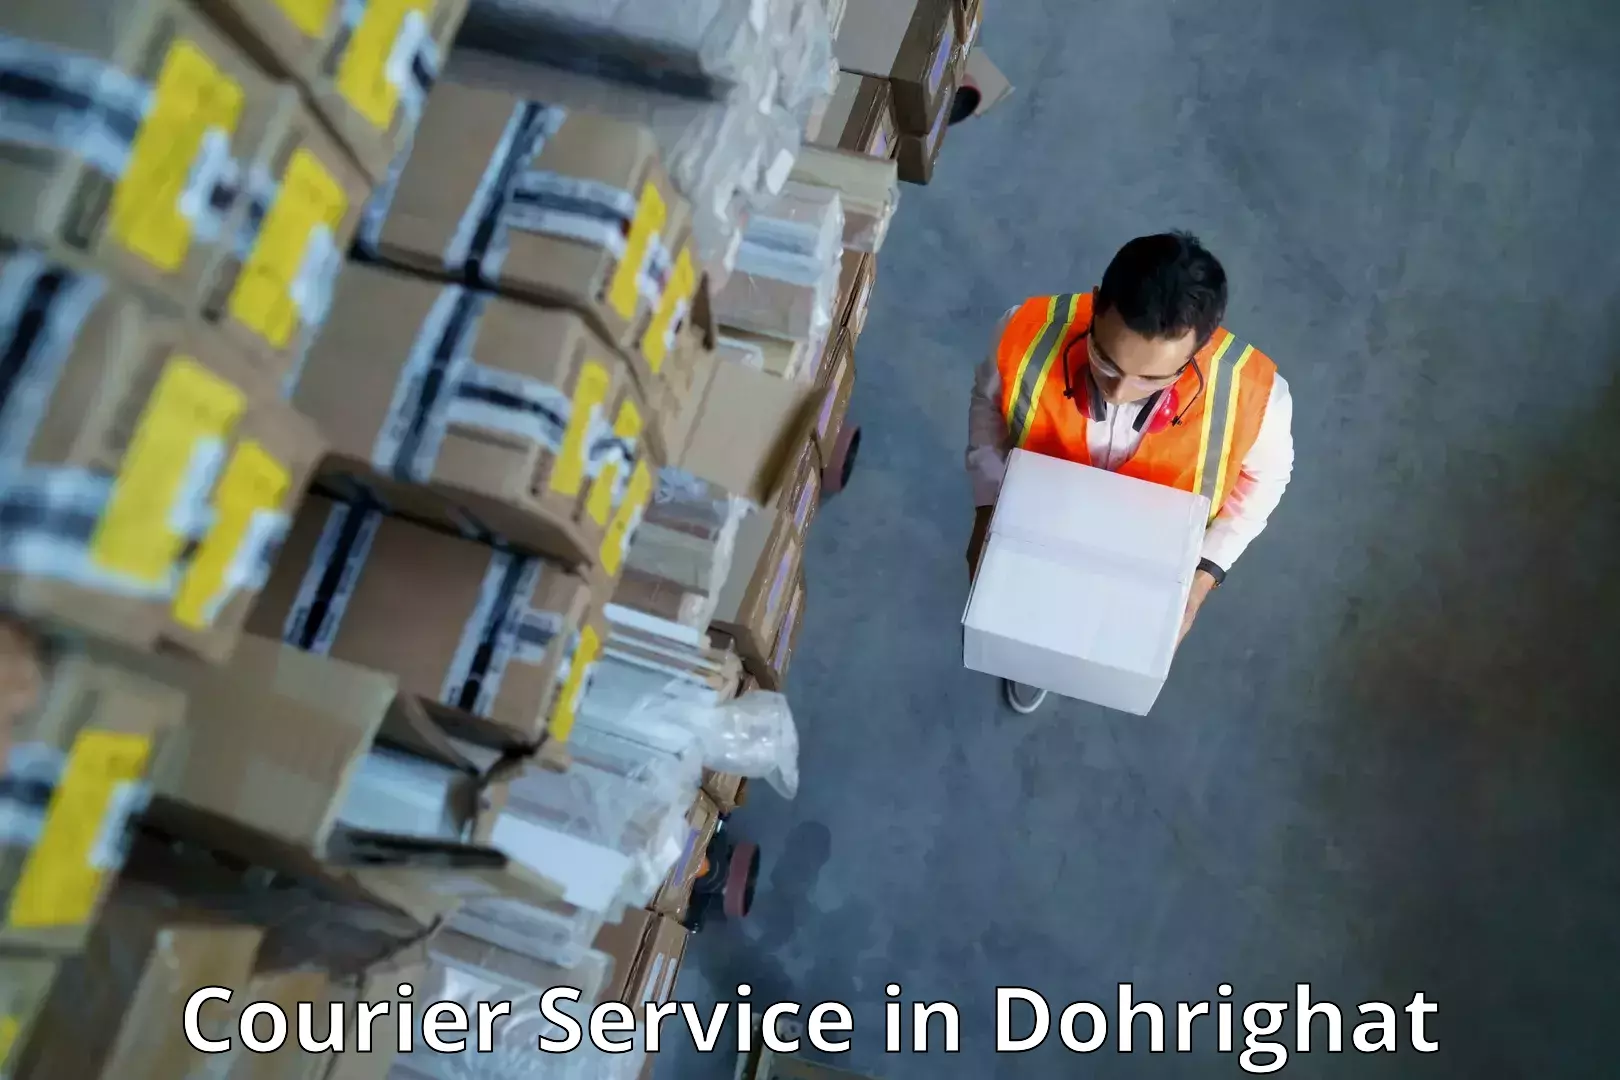 Overnight delivery in Dohrighat